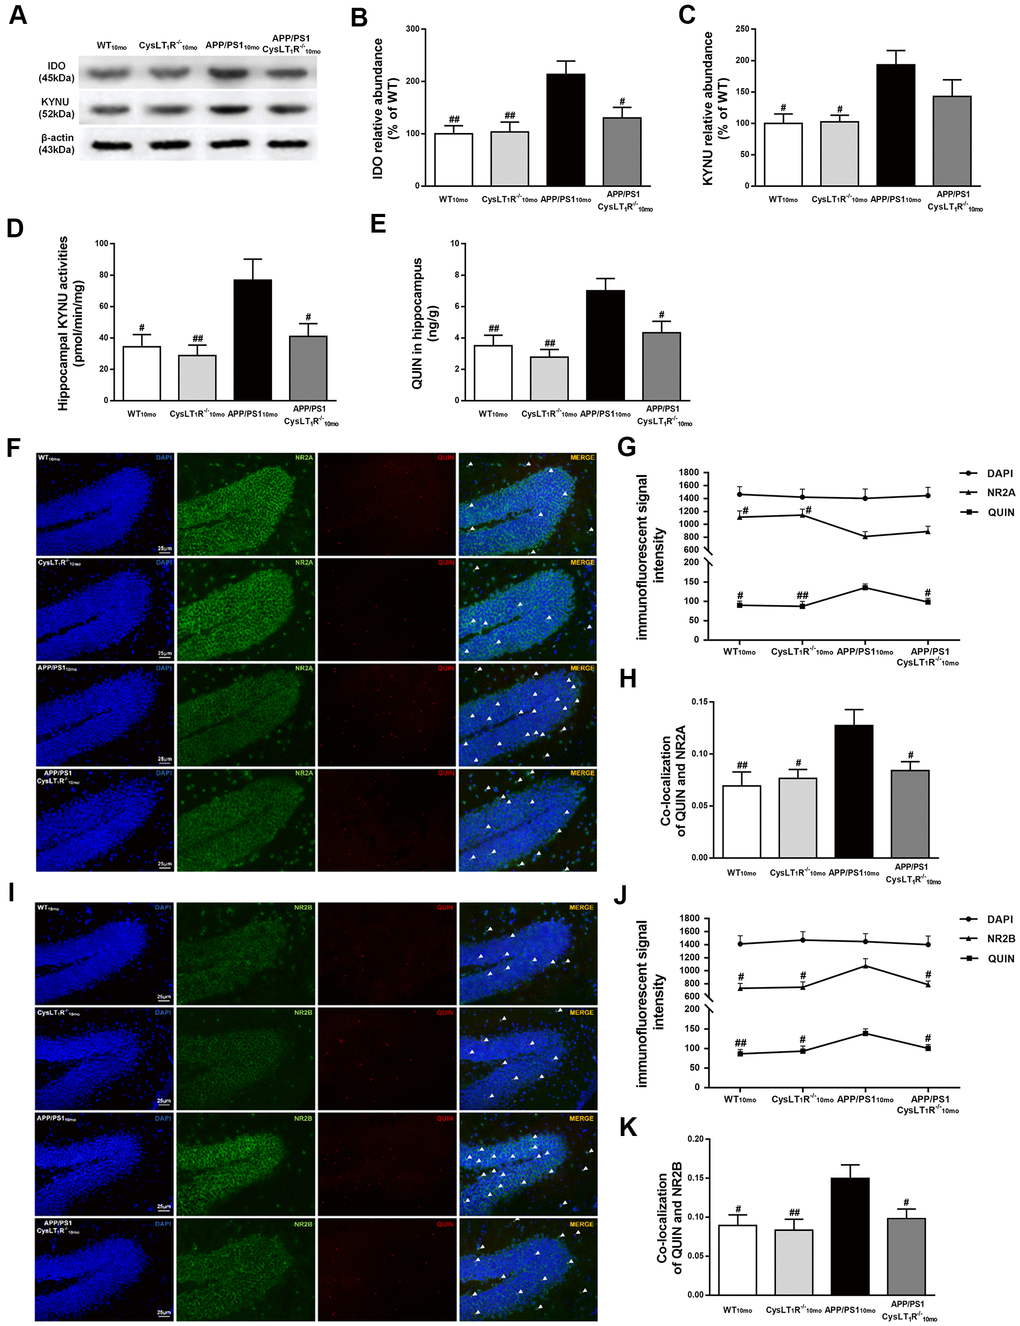 Kynurenine pathway is involved in CysLT1R-mediated synaptic dysfunction. (A) Representative immunoblots of IDO and KYNU protein in mice hippocampus. Quantifications of (B) IDO and (C) KYNU protein levels were expressed as the ratio (in %) of the WT mice. (D) Hippocampal KYNU activities were assessed by HPLC. (E) QUIN content in the hippocampus was detected by LC-MS/MS. The colocalization of QUIN with (F) NR2A or (I) NR2B was measured by immunofluorescence, respectively. (G) The immunofluorescent signal intensity of QUIN, NR2A, and DAPI in the DG. (J) The immunofluorescent signal intensity of QUIN, NR2B, and DAPI in the DG. Quantifications of colocalization of QUIN with (H) NR2A or (K) NR2B in hippocampal DG of brain sections were analyzed. All values are mean expressed as mean ± SEM, n = 4, #P, ##P, ###P